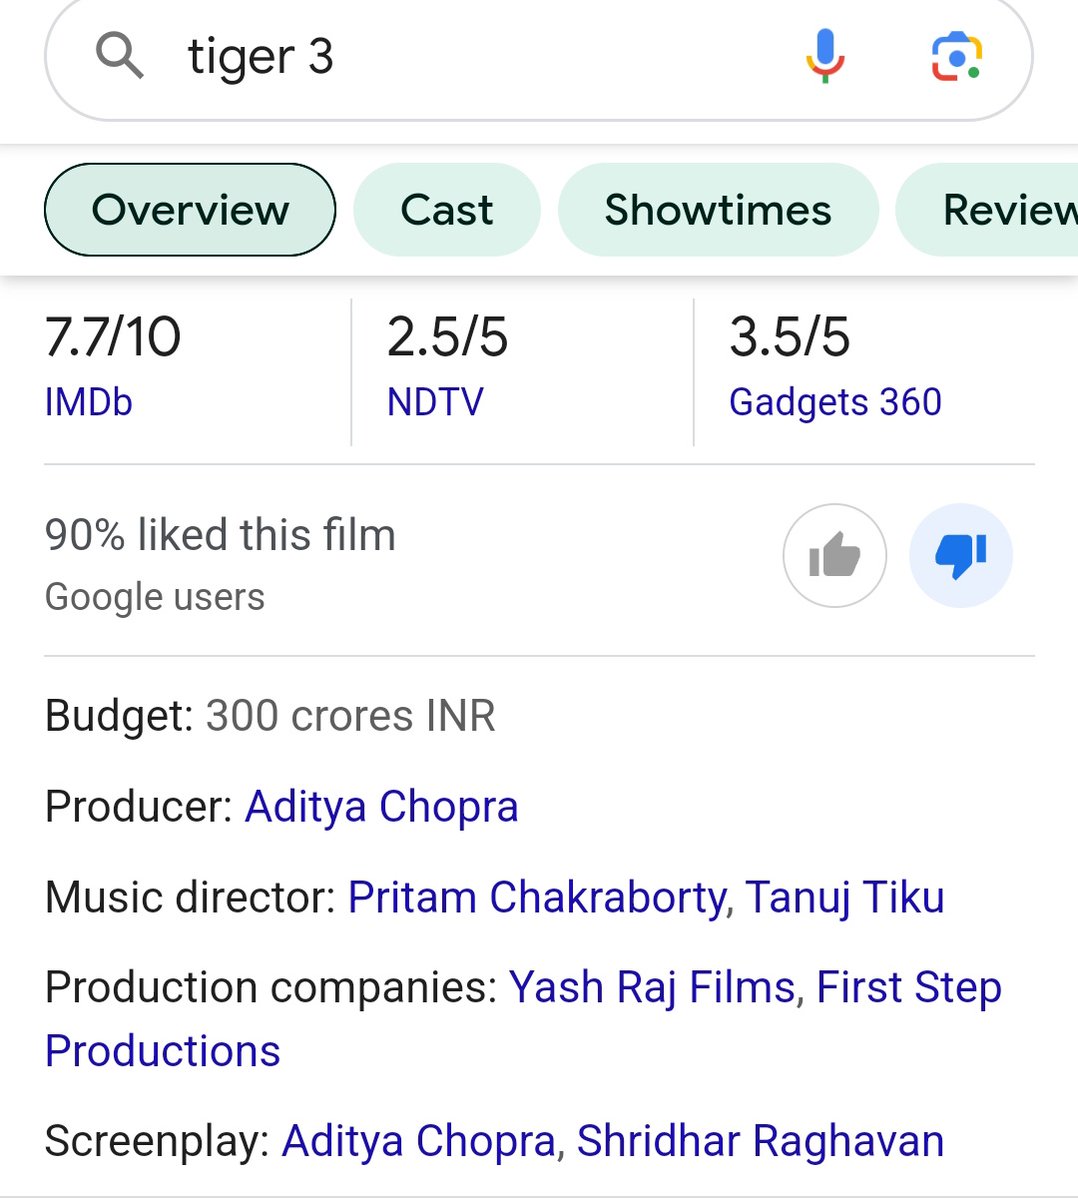 #BoycottTiger3 

Do Google rate, IMDb rate ✊🔥no more kachara will be tolerated in name of entertainment ✊🔥

#BoycottBollywood 
#BoycottWholeBollywood 🔥